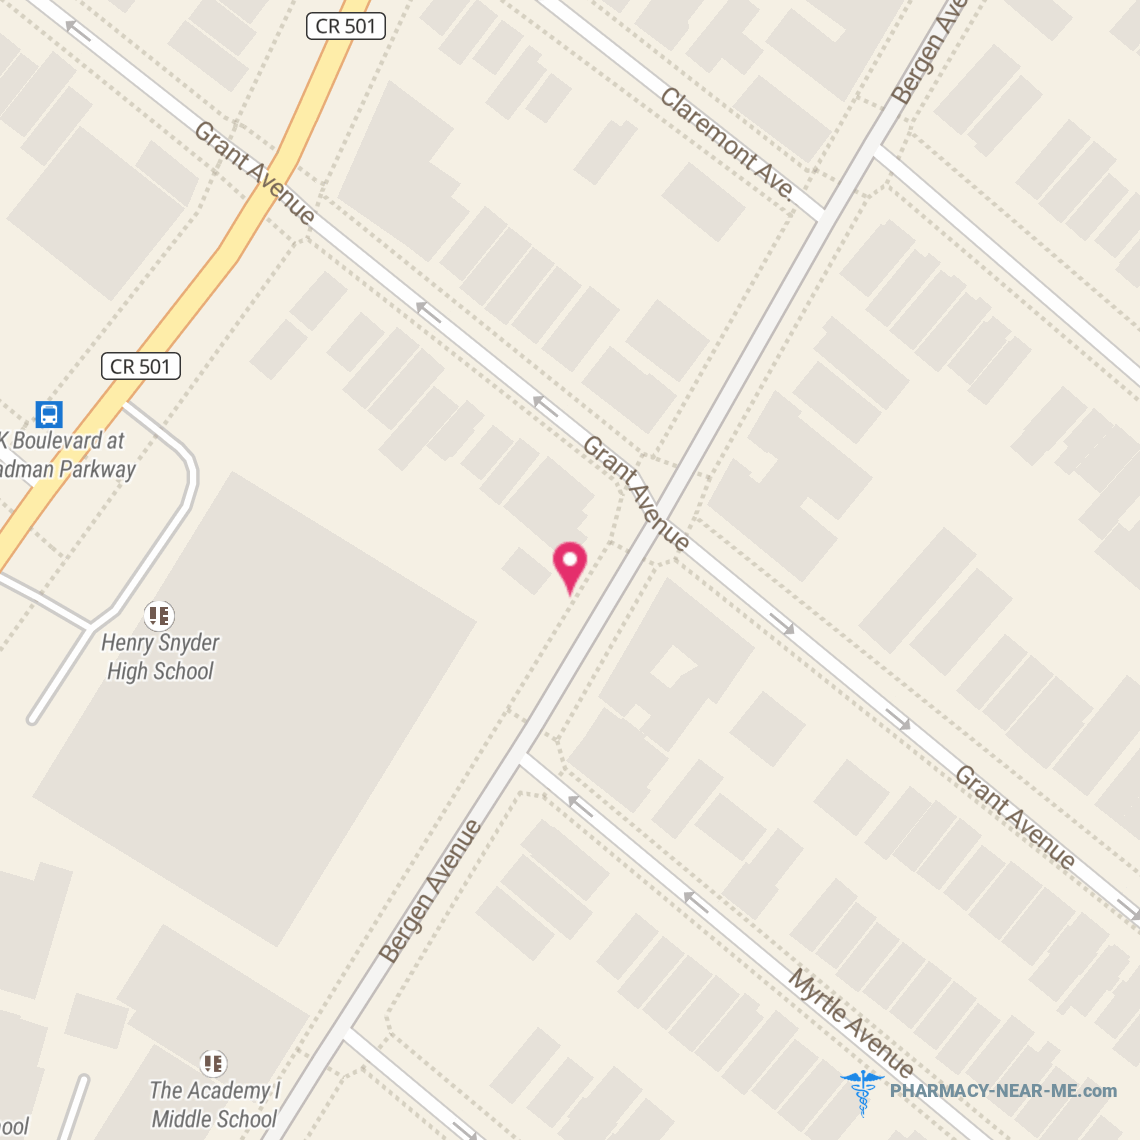 JC CHEMIST - Pharmacy Hours, Phone, Reviews & Information: 239 Old Bergen Road, Jersey City, New Jersey 07305, United States